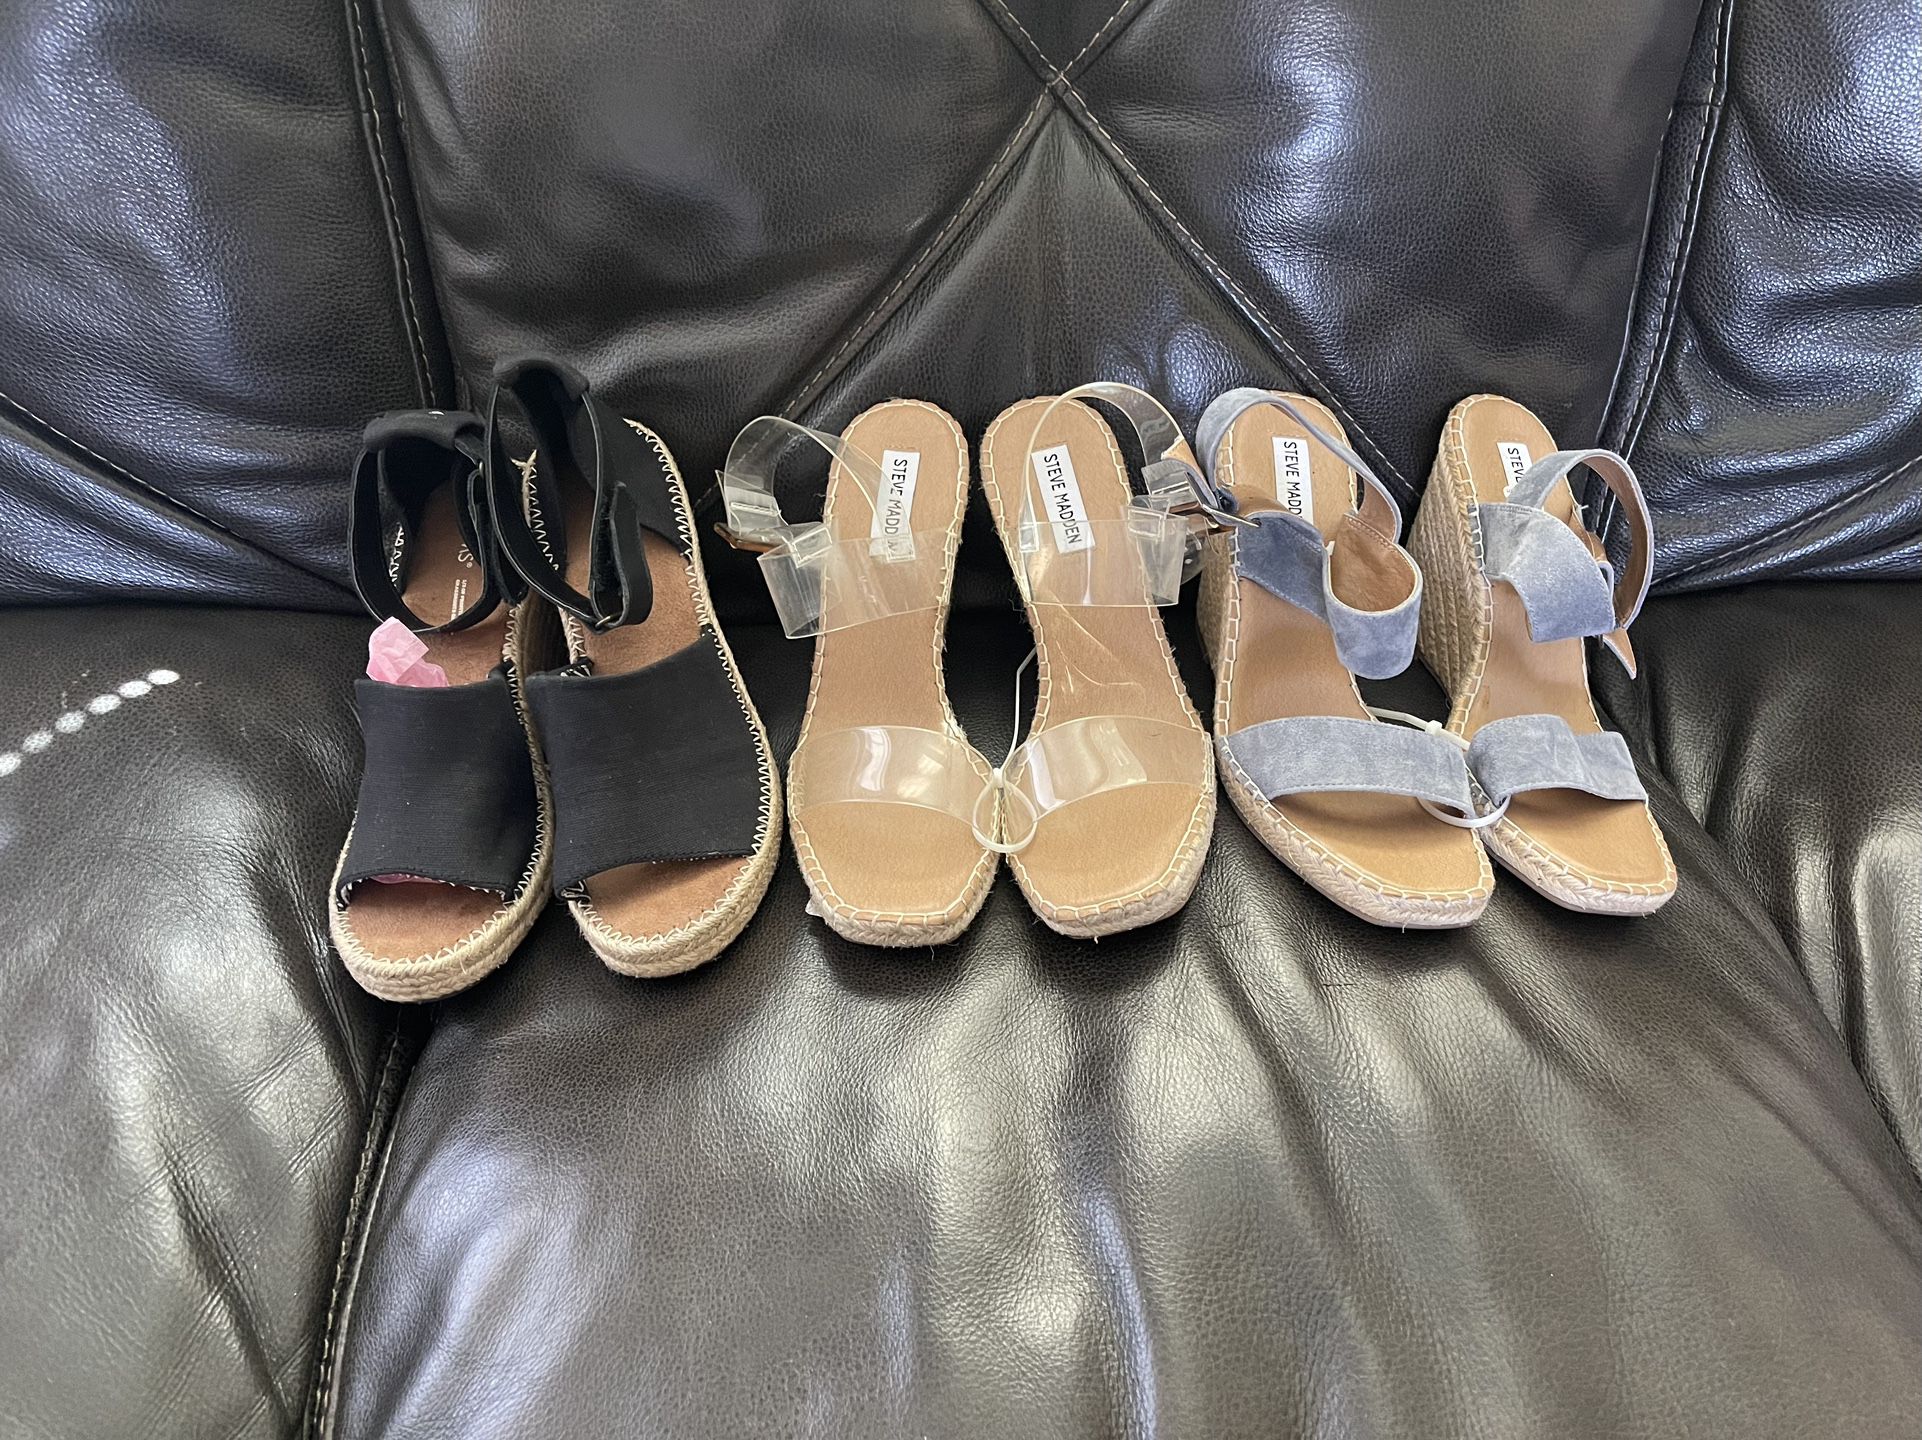 Steve Madden and Toms Wedges Shoes